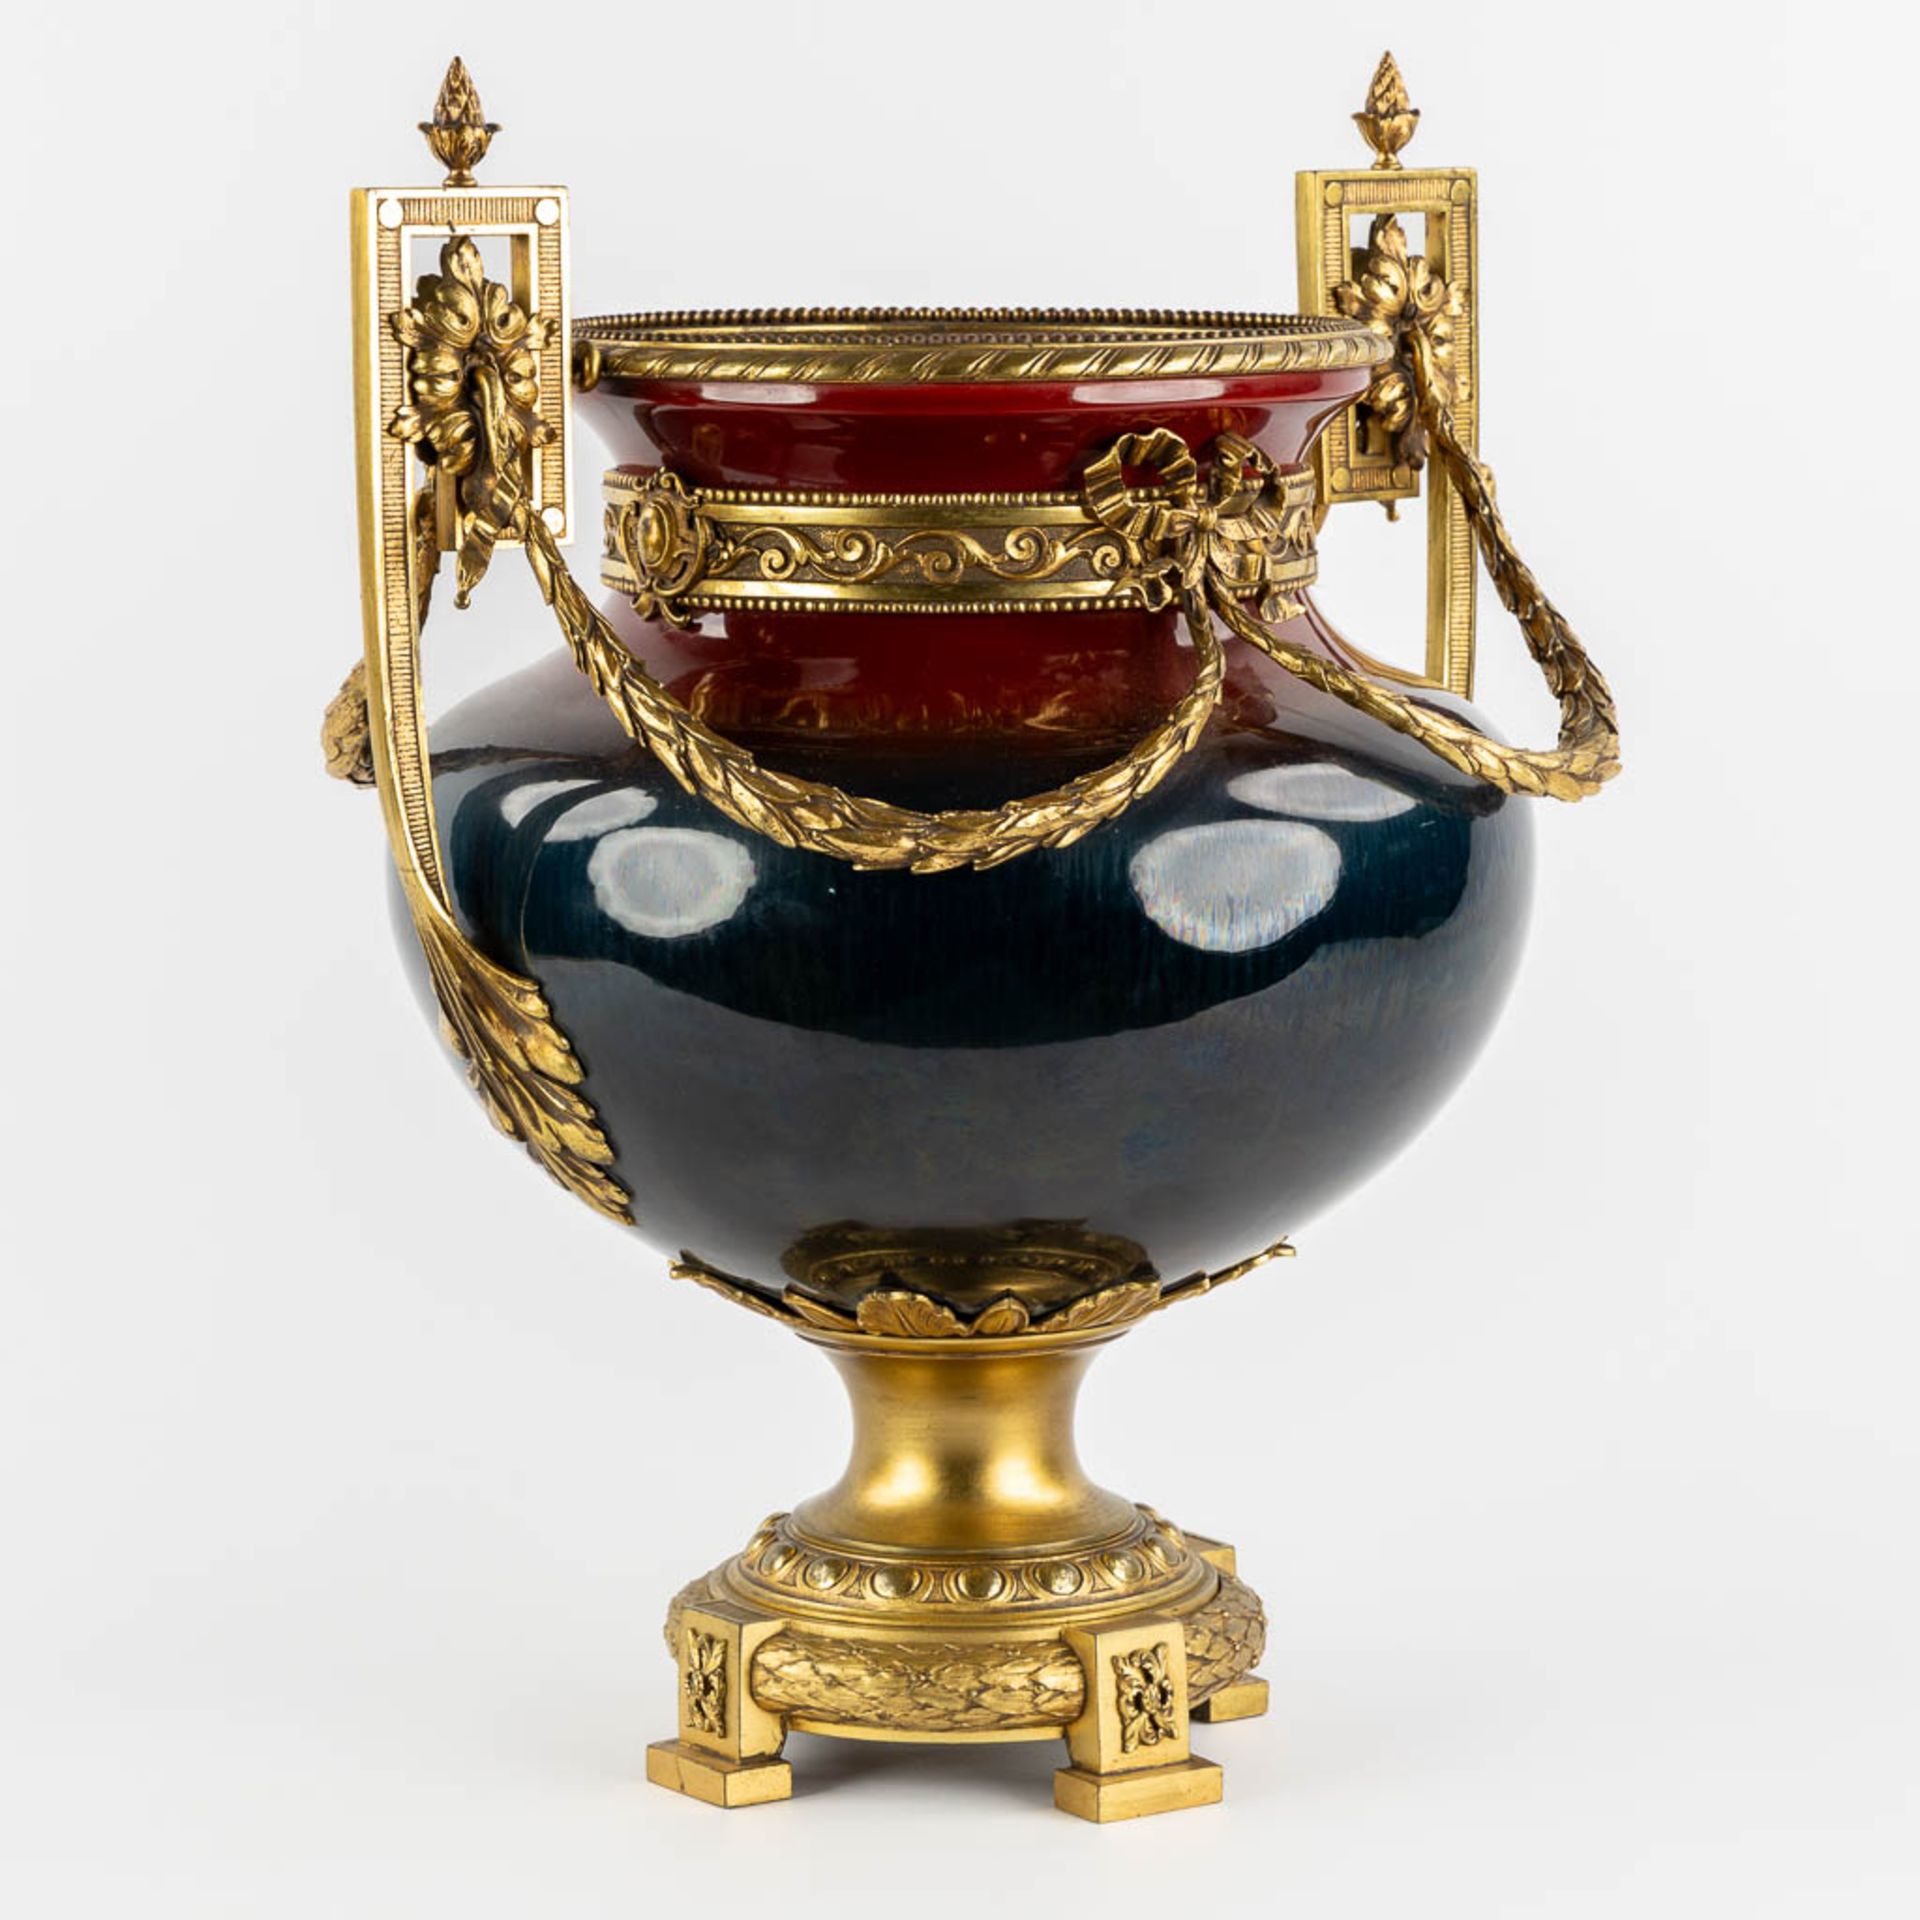 A large faience vase mounted with gilt bronze in Louis XV style. Circa 1900. (L:34 x W:40 x H:50 cm) - Image 3 of 12